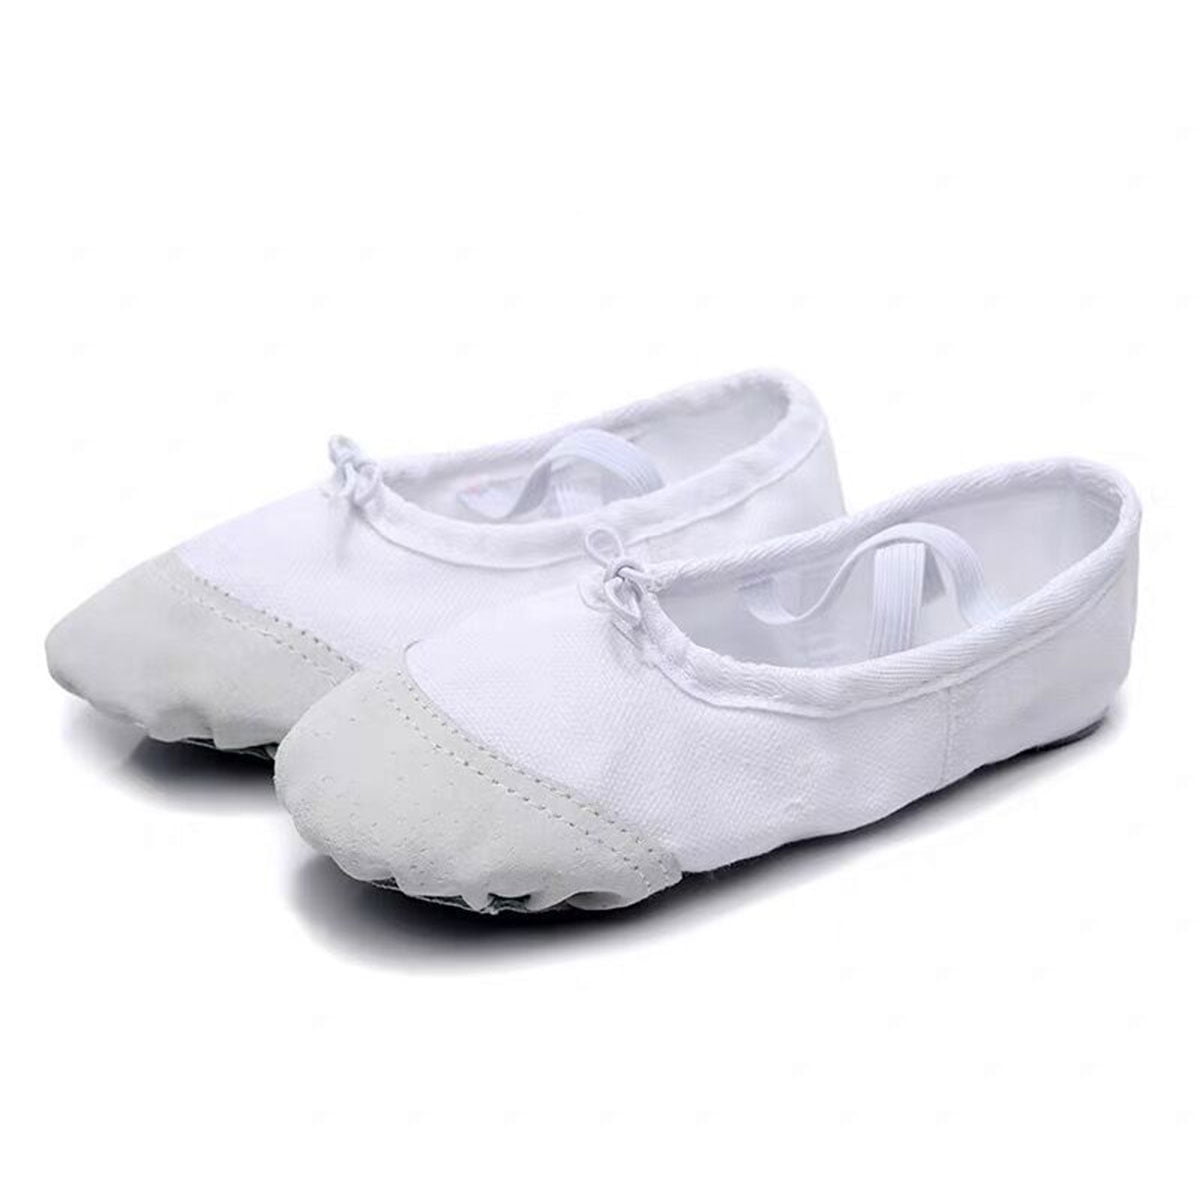 Kid Girls Canvas Ballet Dancing Flat Yoga Practise Shoes with Flower 